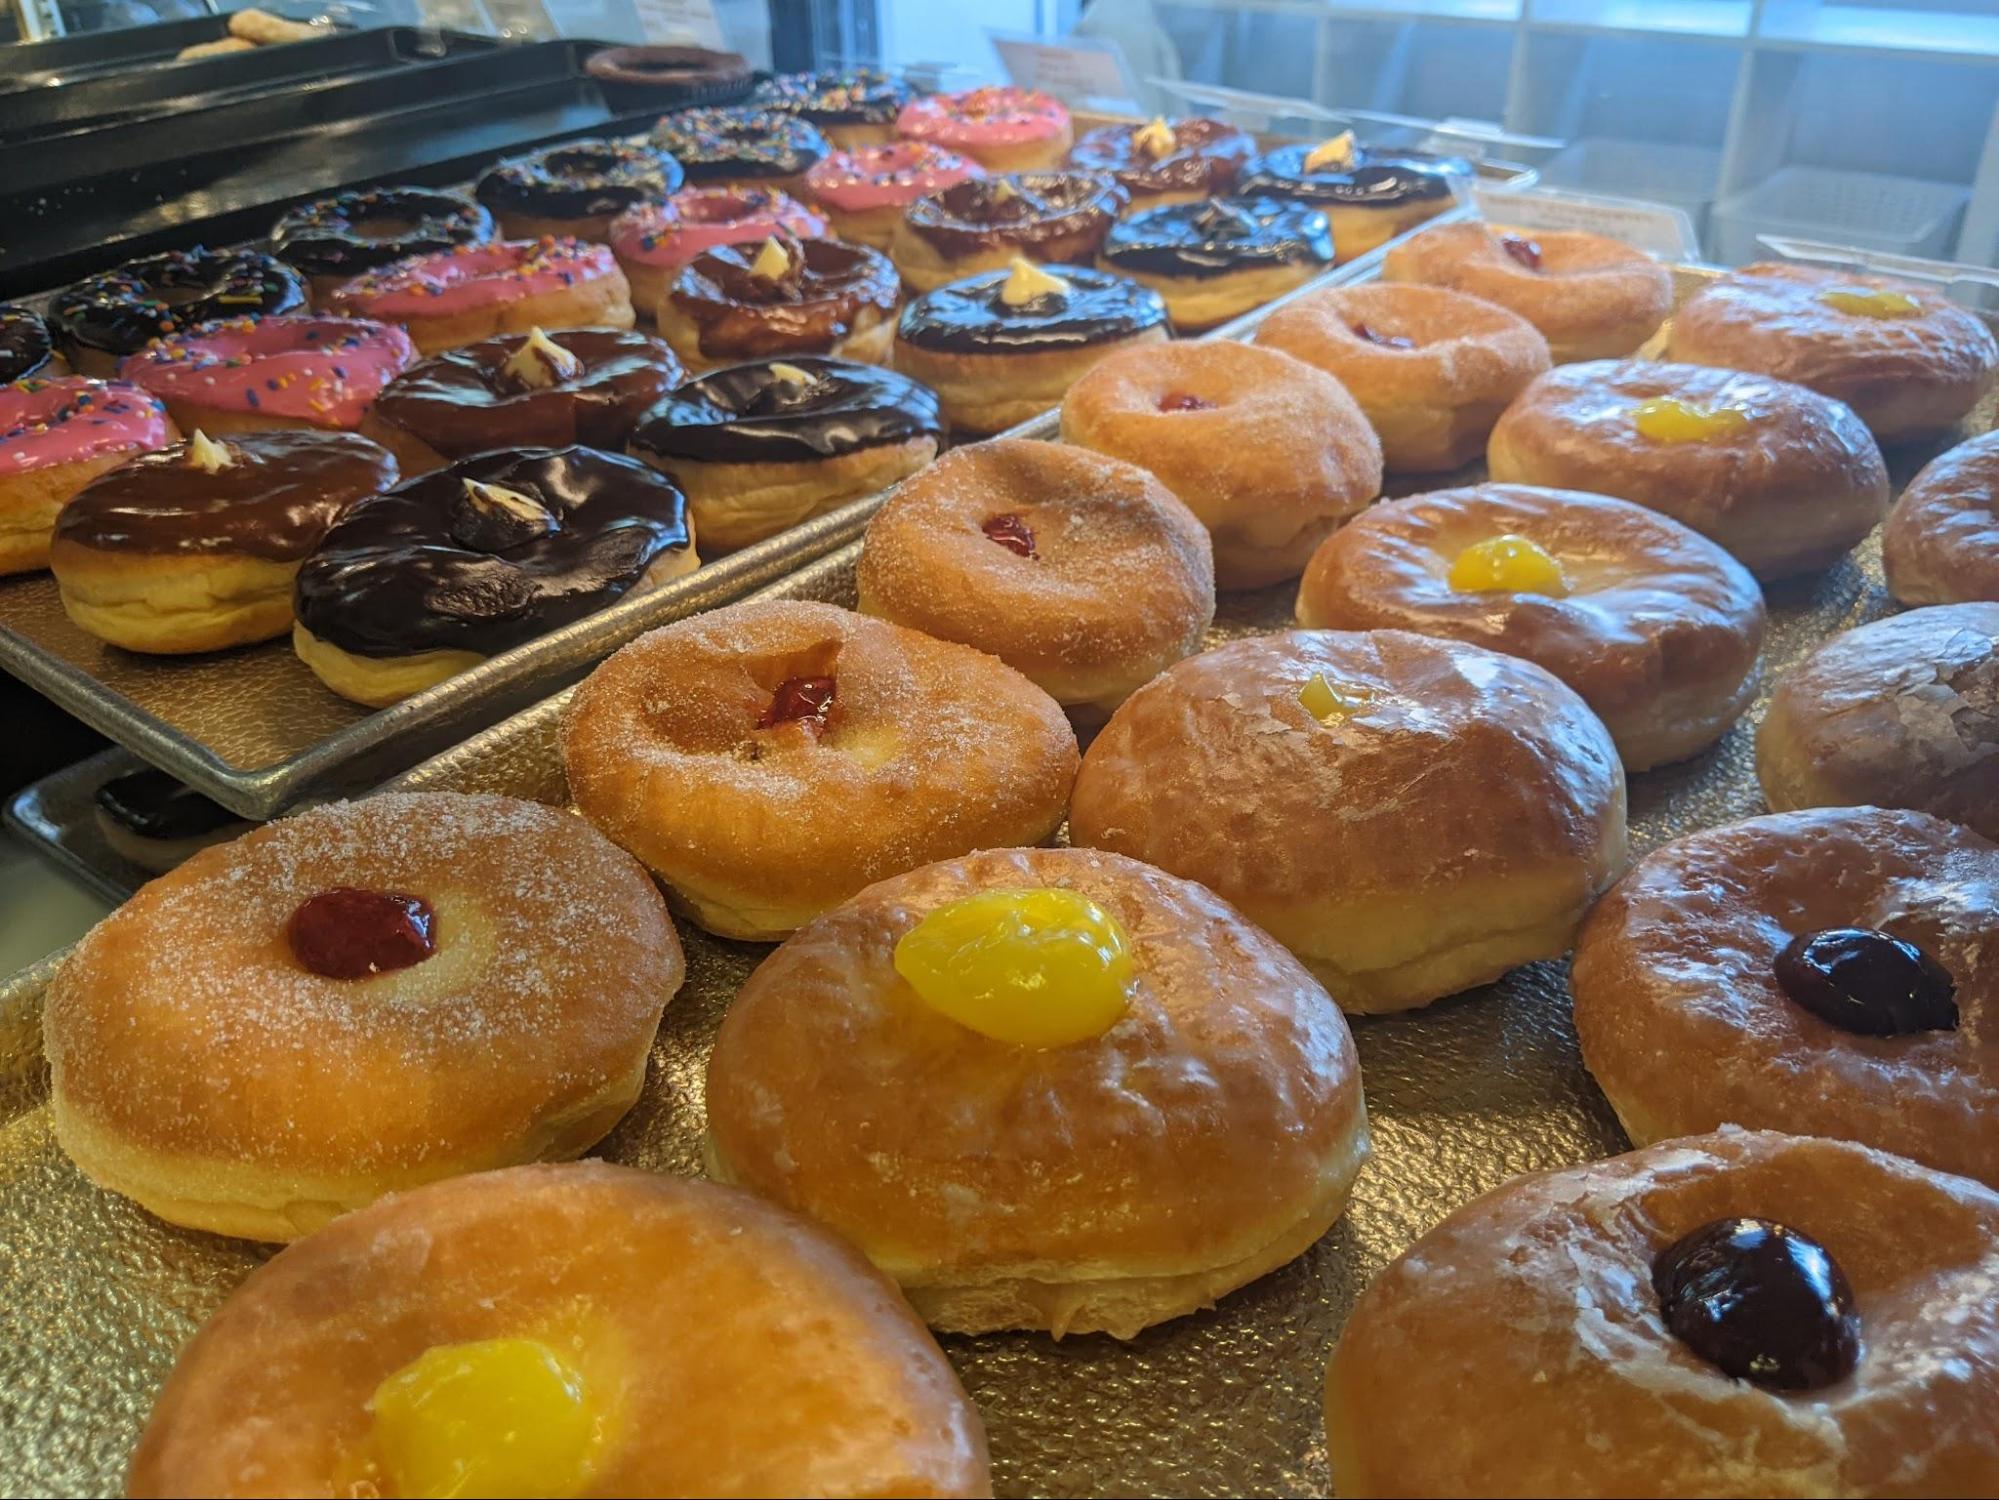 A wide selection of donuts available at the Rolling Pin Bakery in Hope, BC.